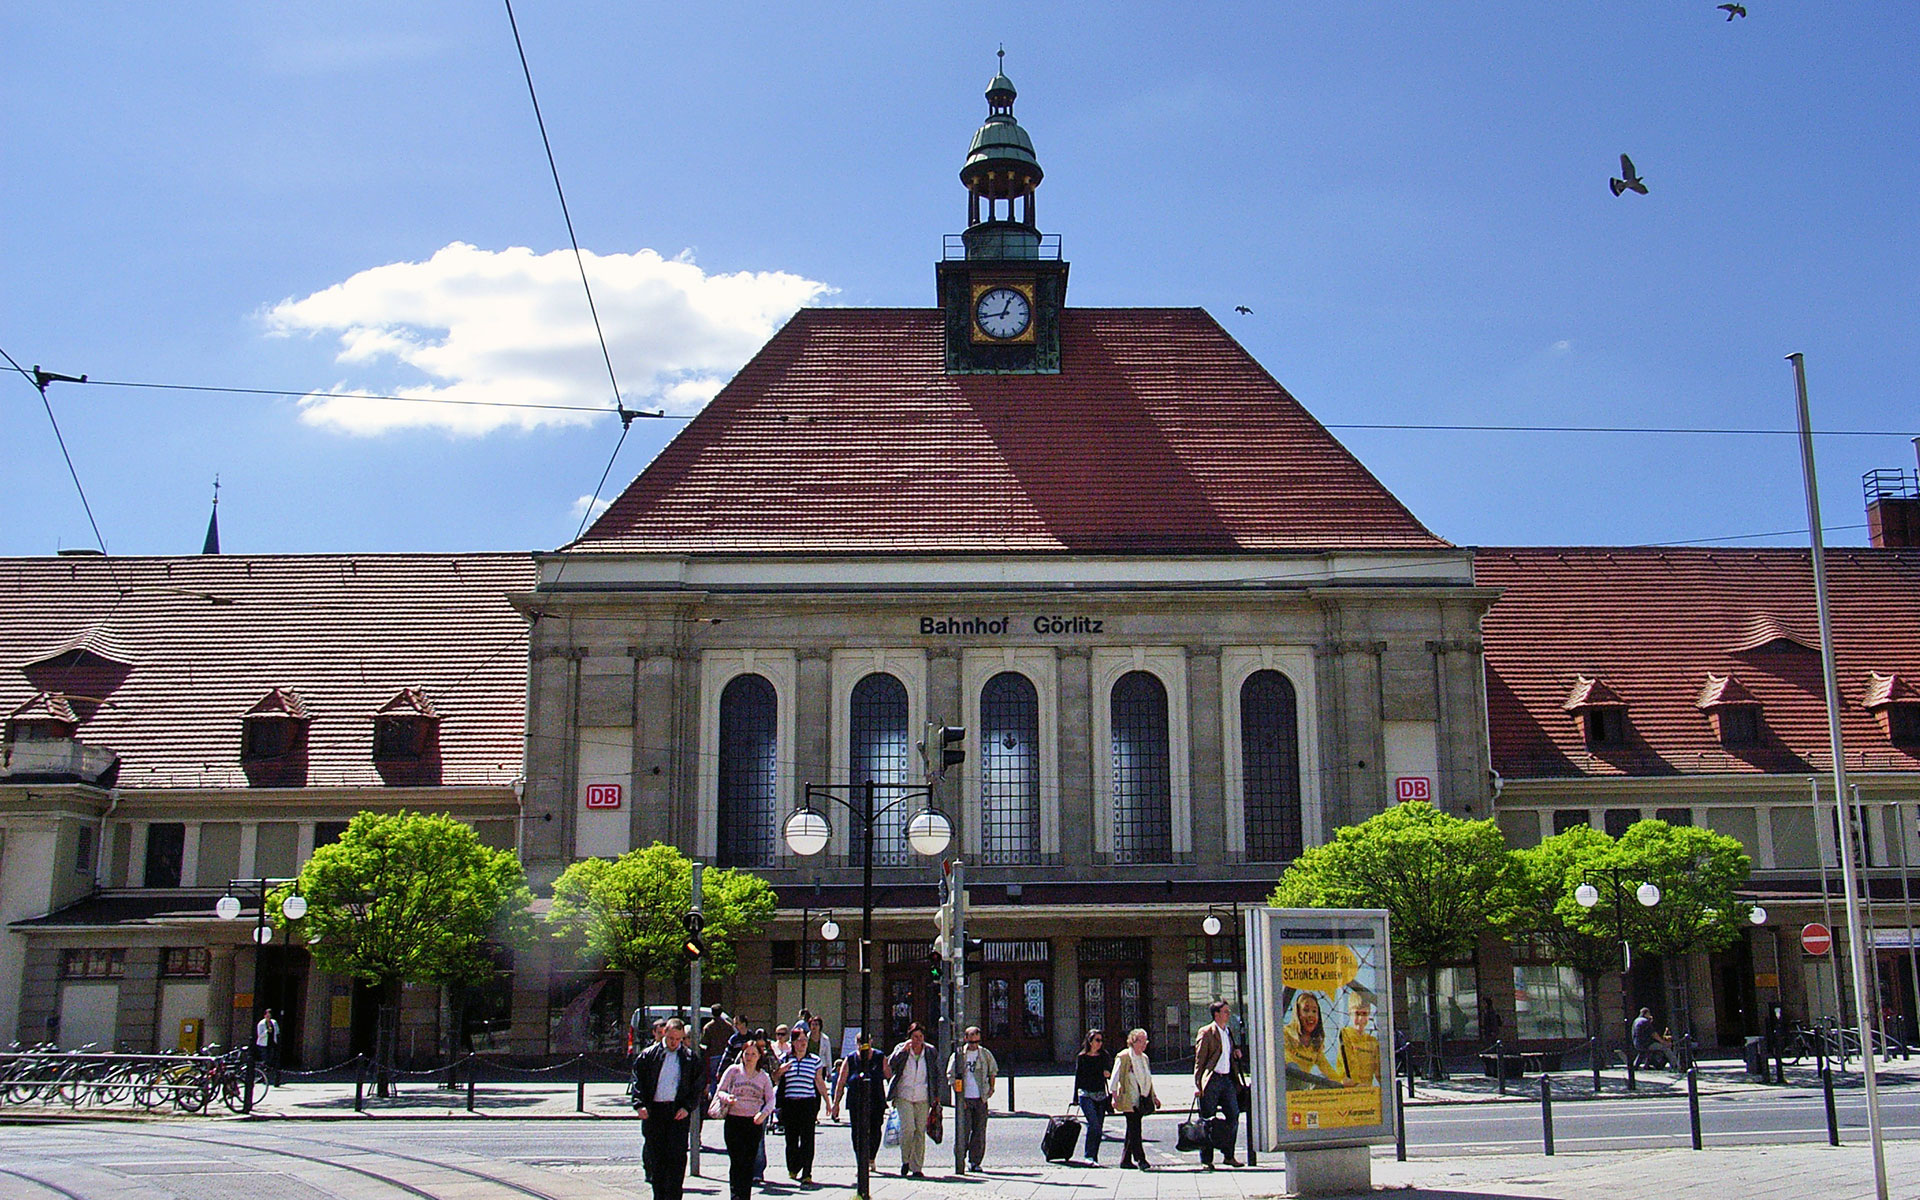 The main station of Görlitz, Germany (<a href="https://commons.wikimedia.org/wiki/File:Bahnhof_G%C3%B6rlitz.jpg">photo</a> by Manecke / <a href="https://creativecommons.org/licenses/by-sa/3.0/deed.en">CC BY-SA 3.0</a>)